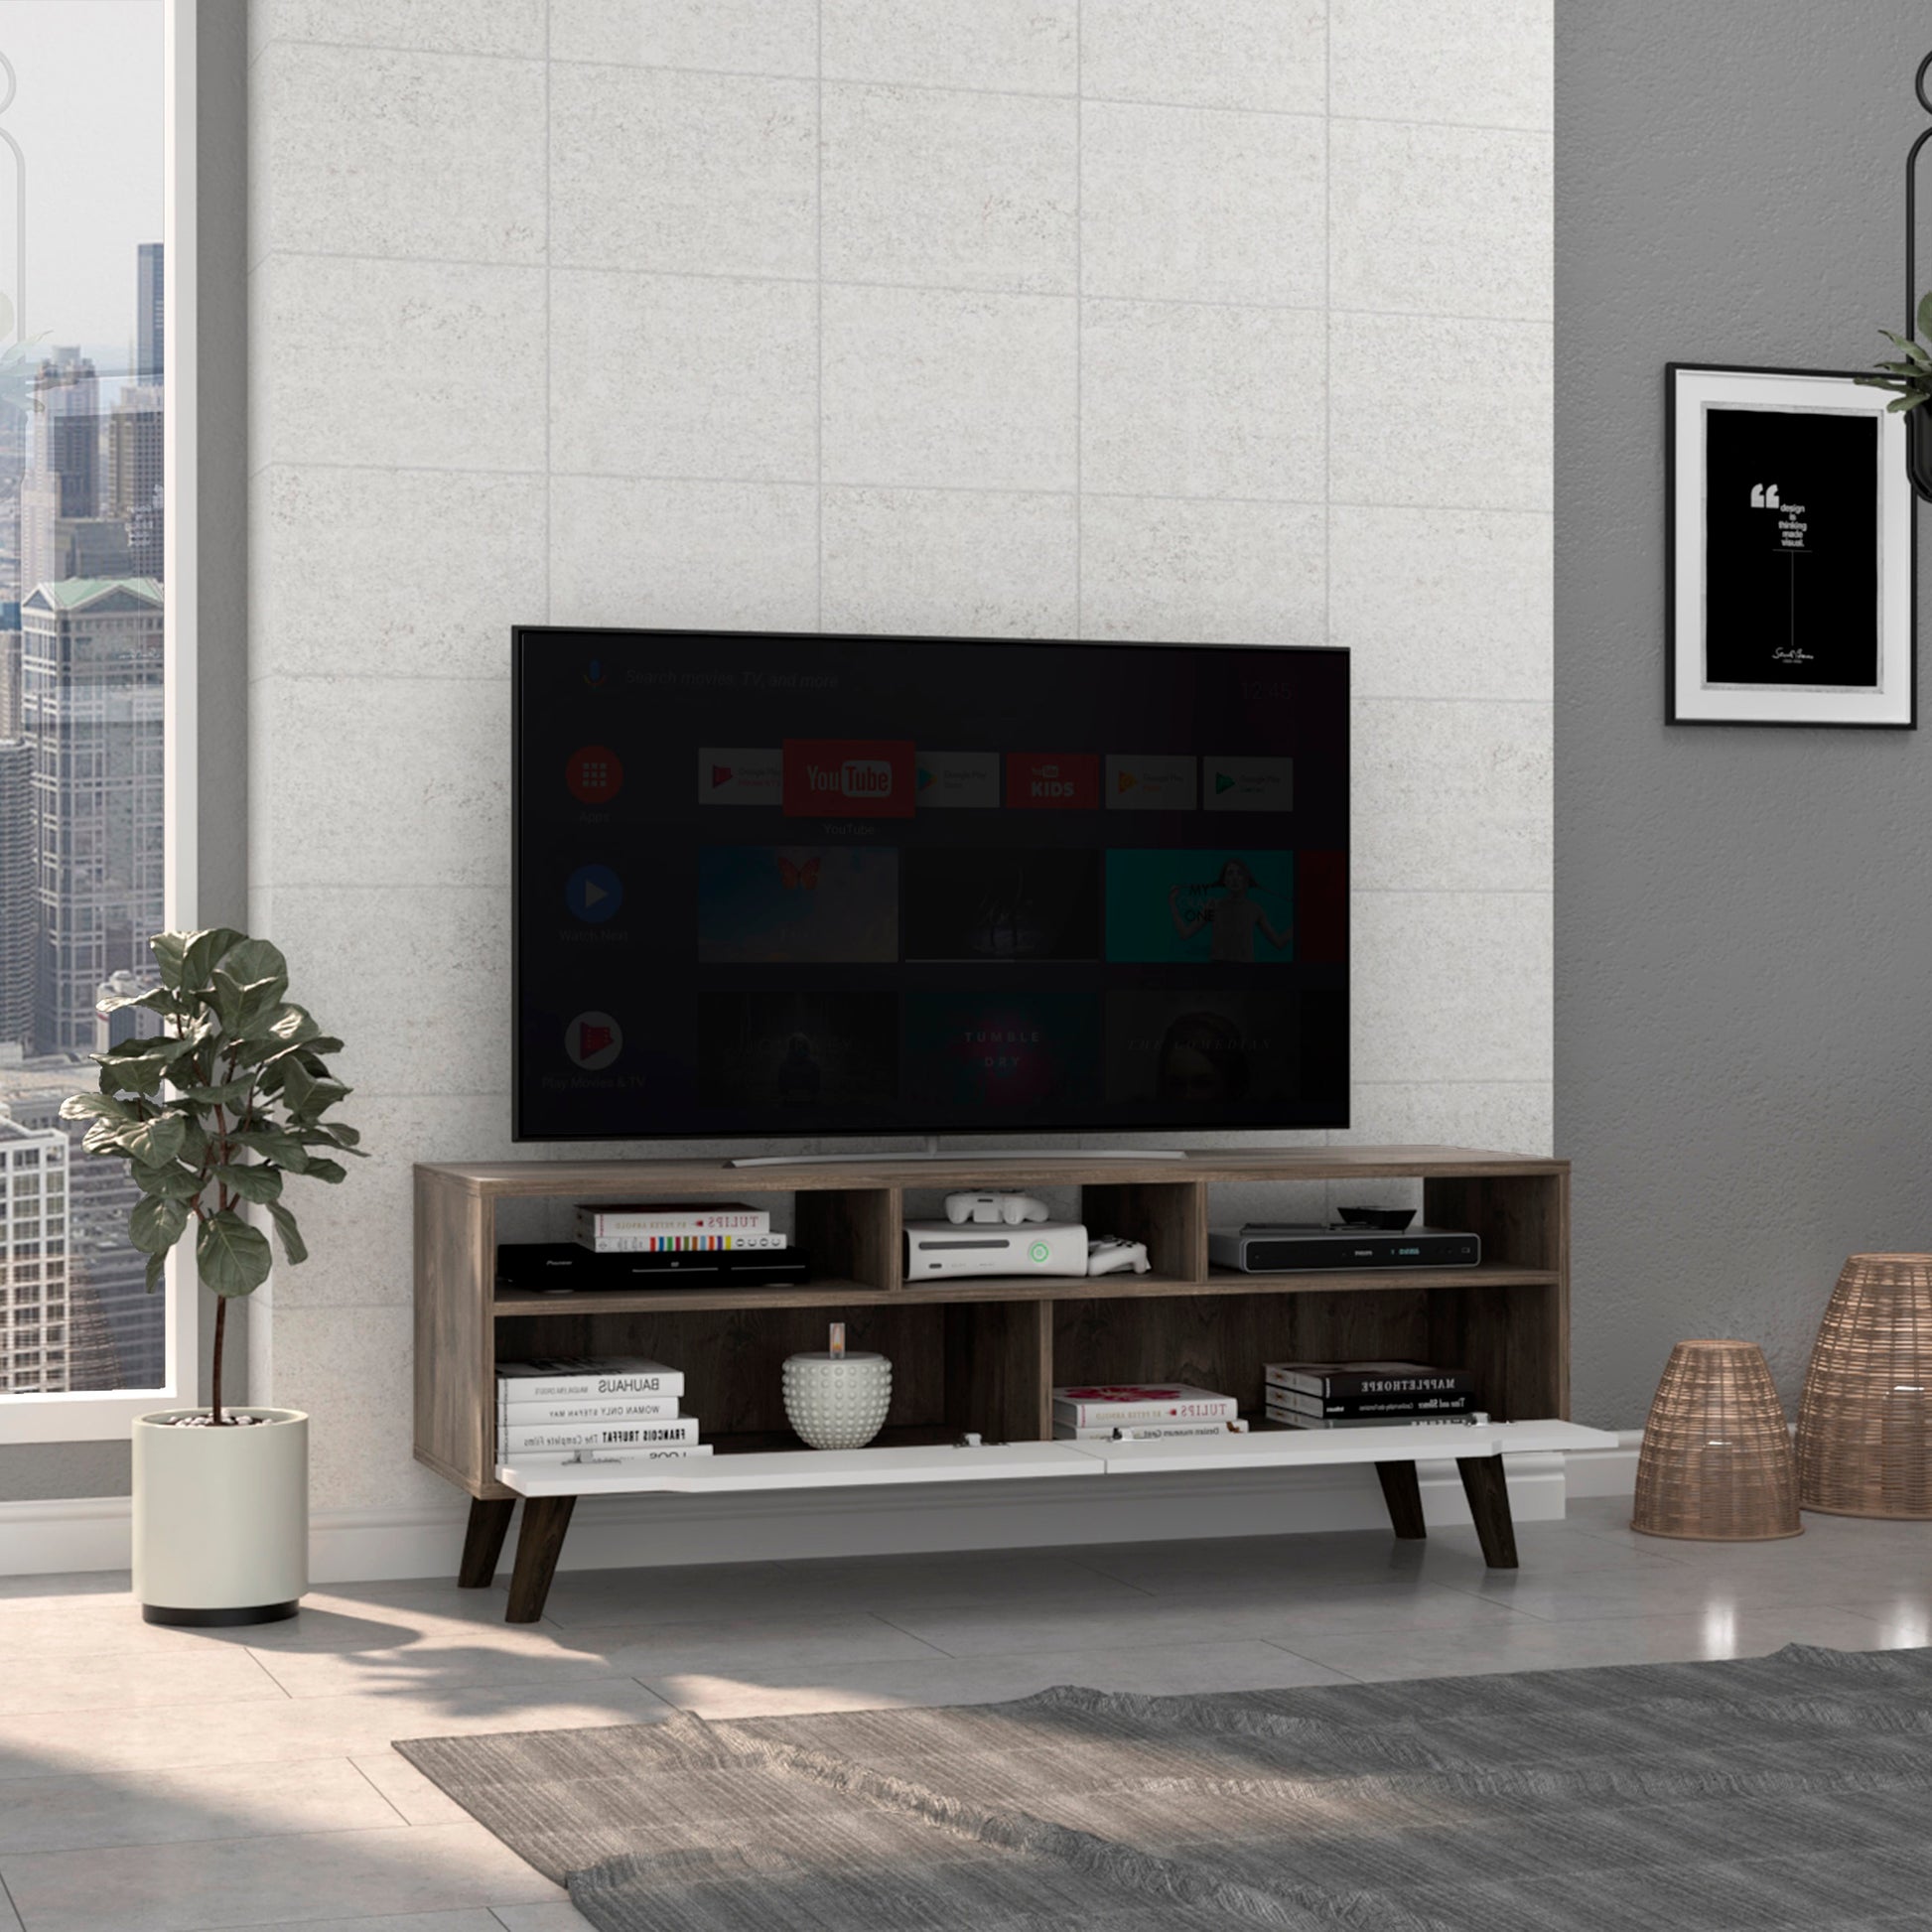 Oslo Tv Stand for TV´s up 51", Two  Drawers, Four Legs, Three Open Shelves -Dark Brown / White - Enova Luxe Home Store